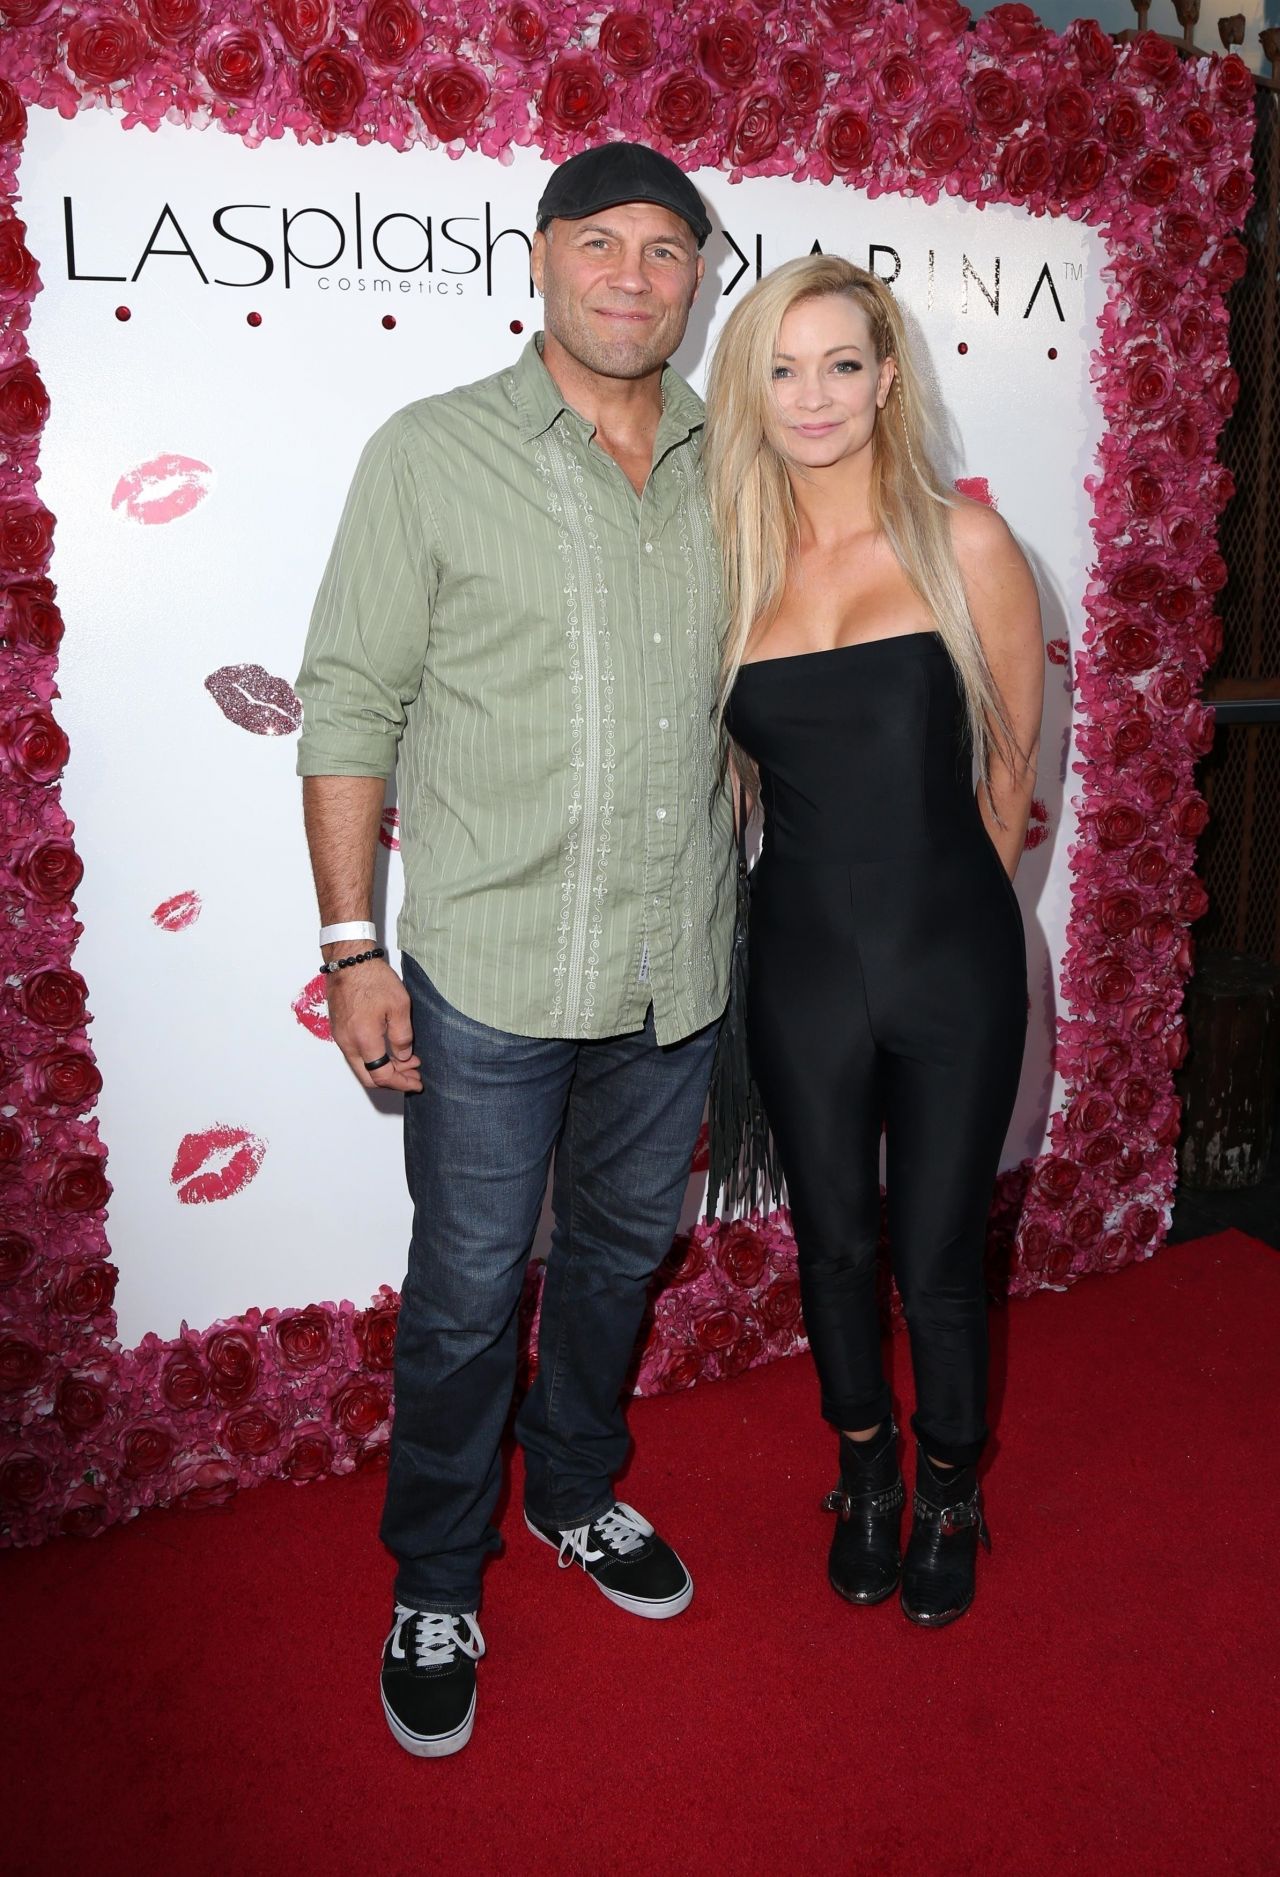 Mindy Robinson Launch Party For Karina Smirnoff Make Up Collection In